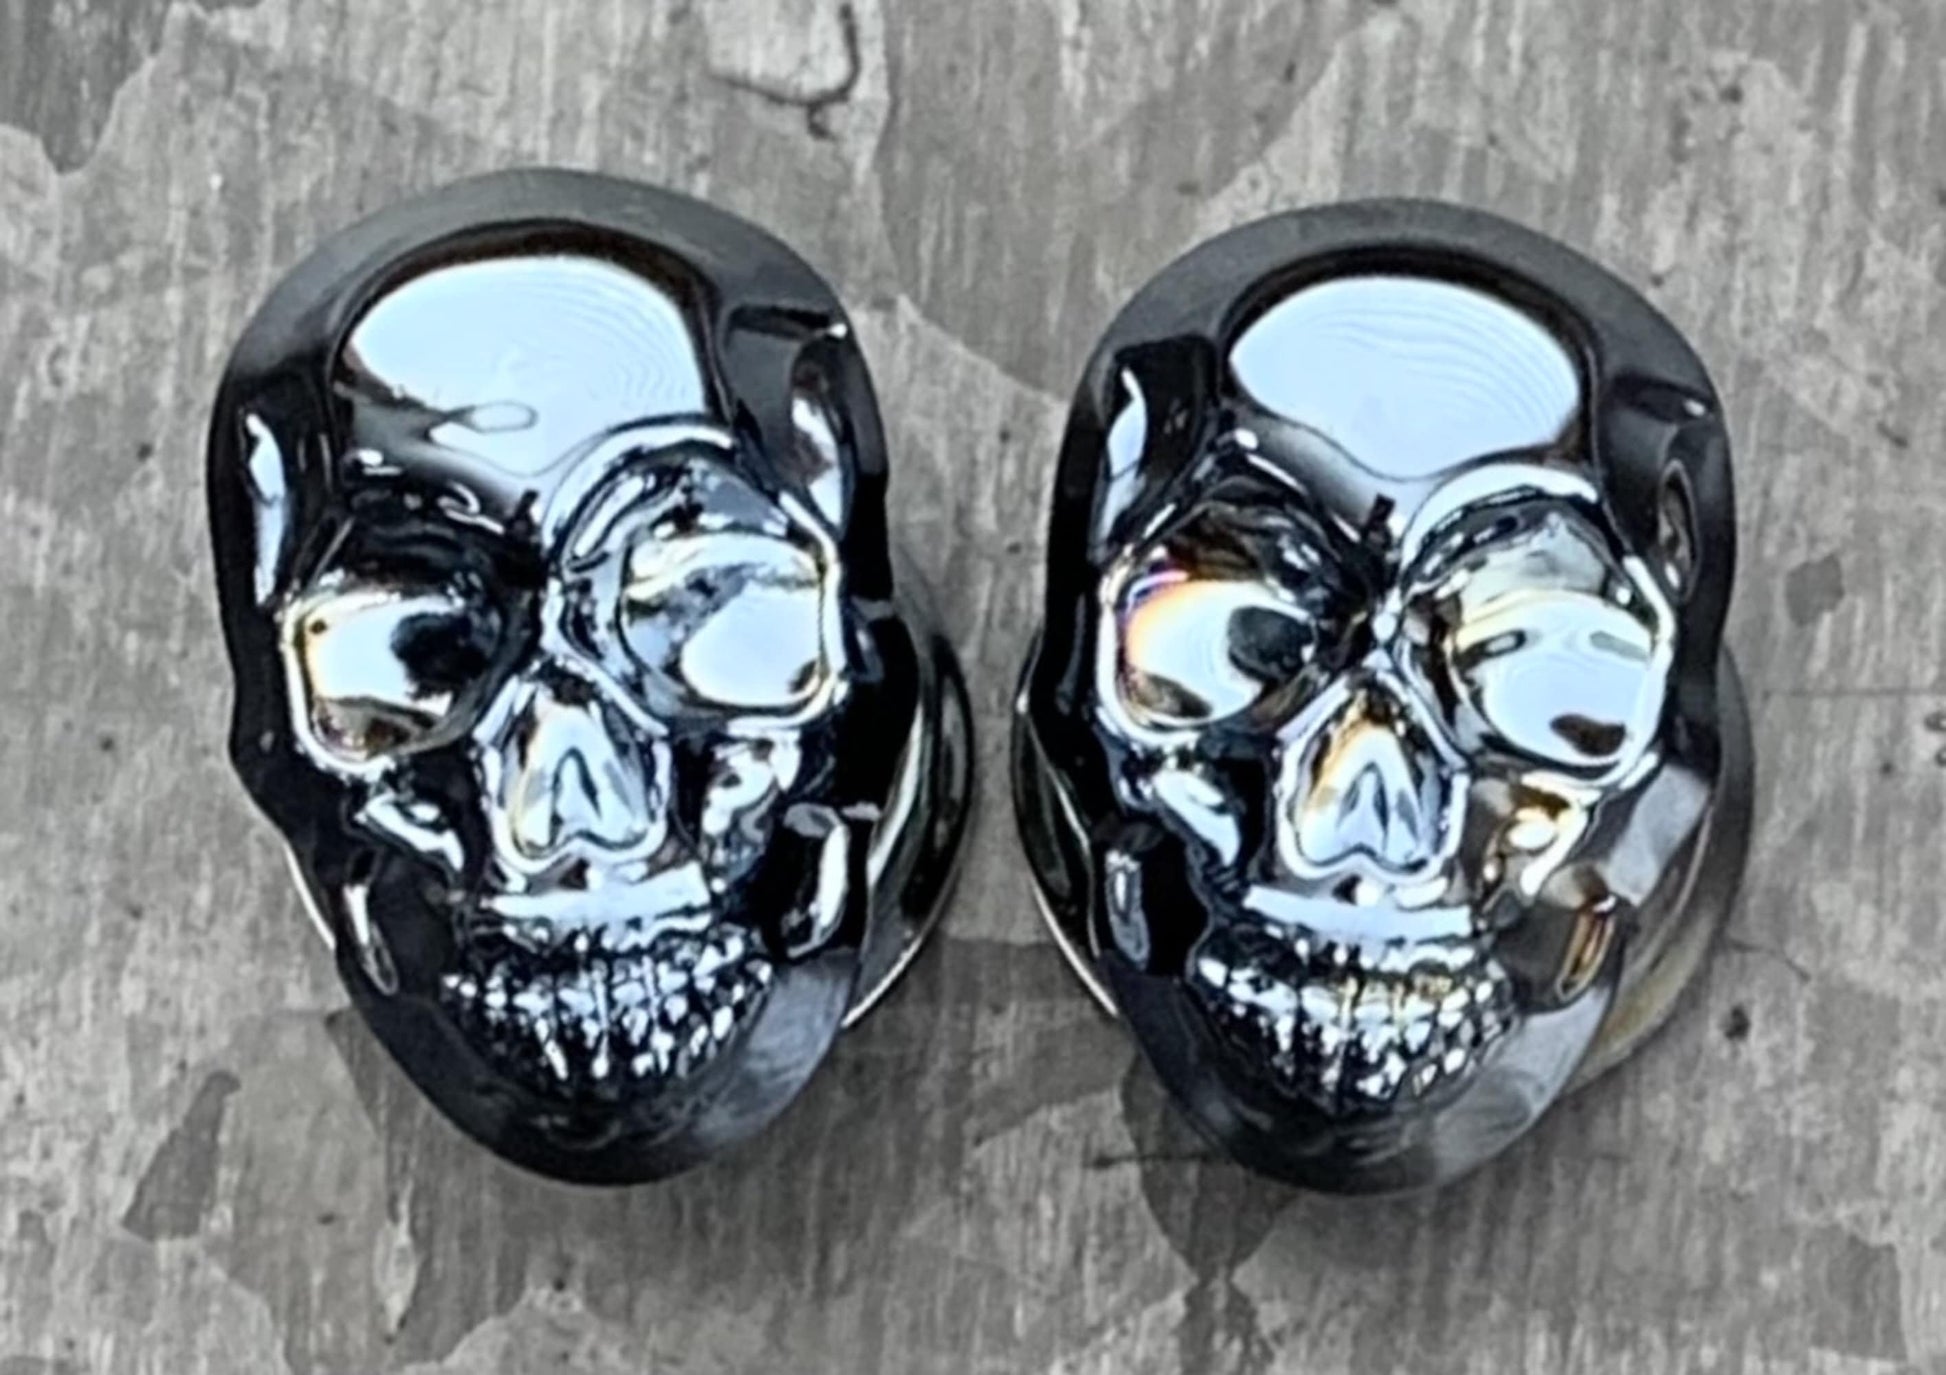 PAIR of Unique Metallic Skull Pyrex Glass Double Flare Plugs/Tunnels - Gauges 2g (6mm) through 5/8" (16mm) available!